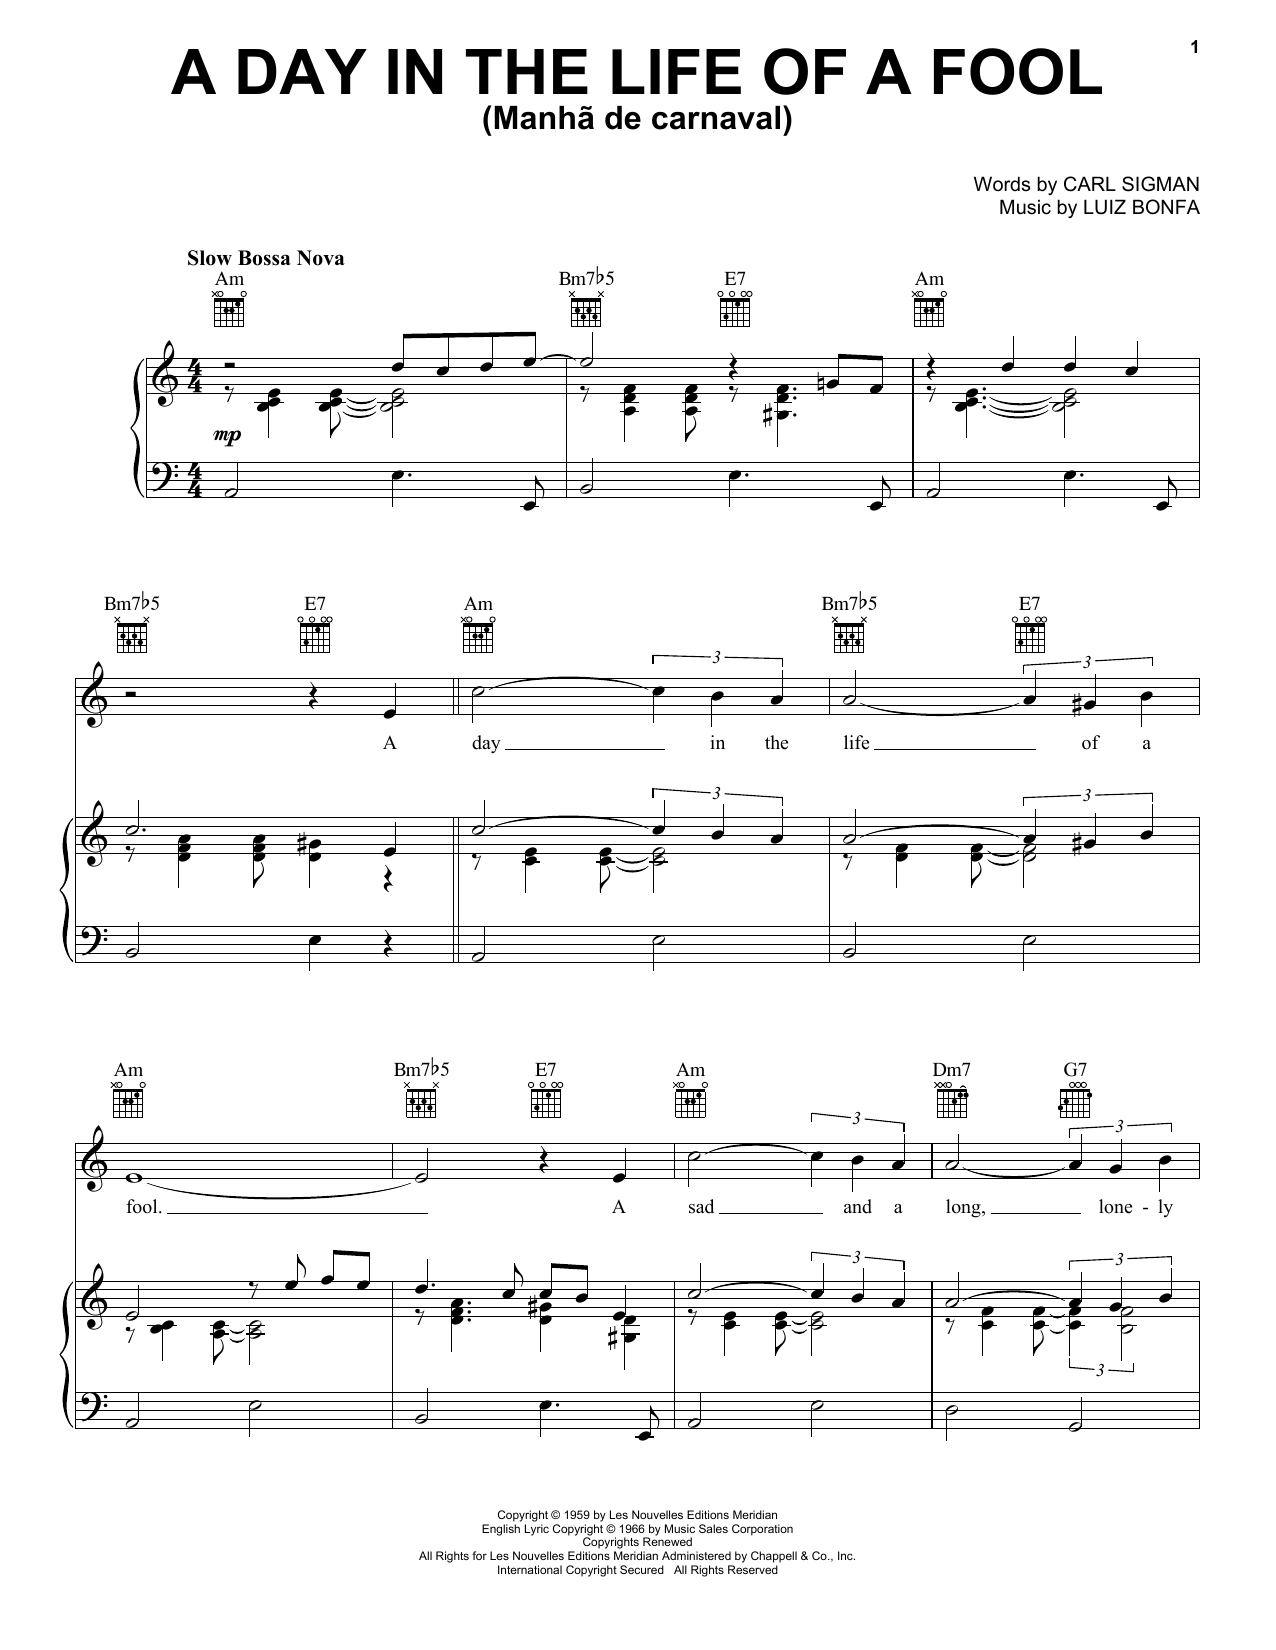 Carl Sigman A Day In The Life Of A Fool (Manha De Carnaval) sheet music notes and chords. Download Printable PDF.